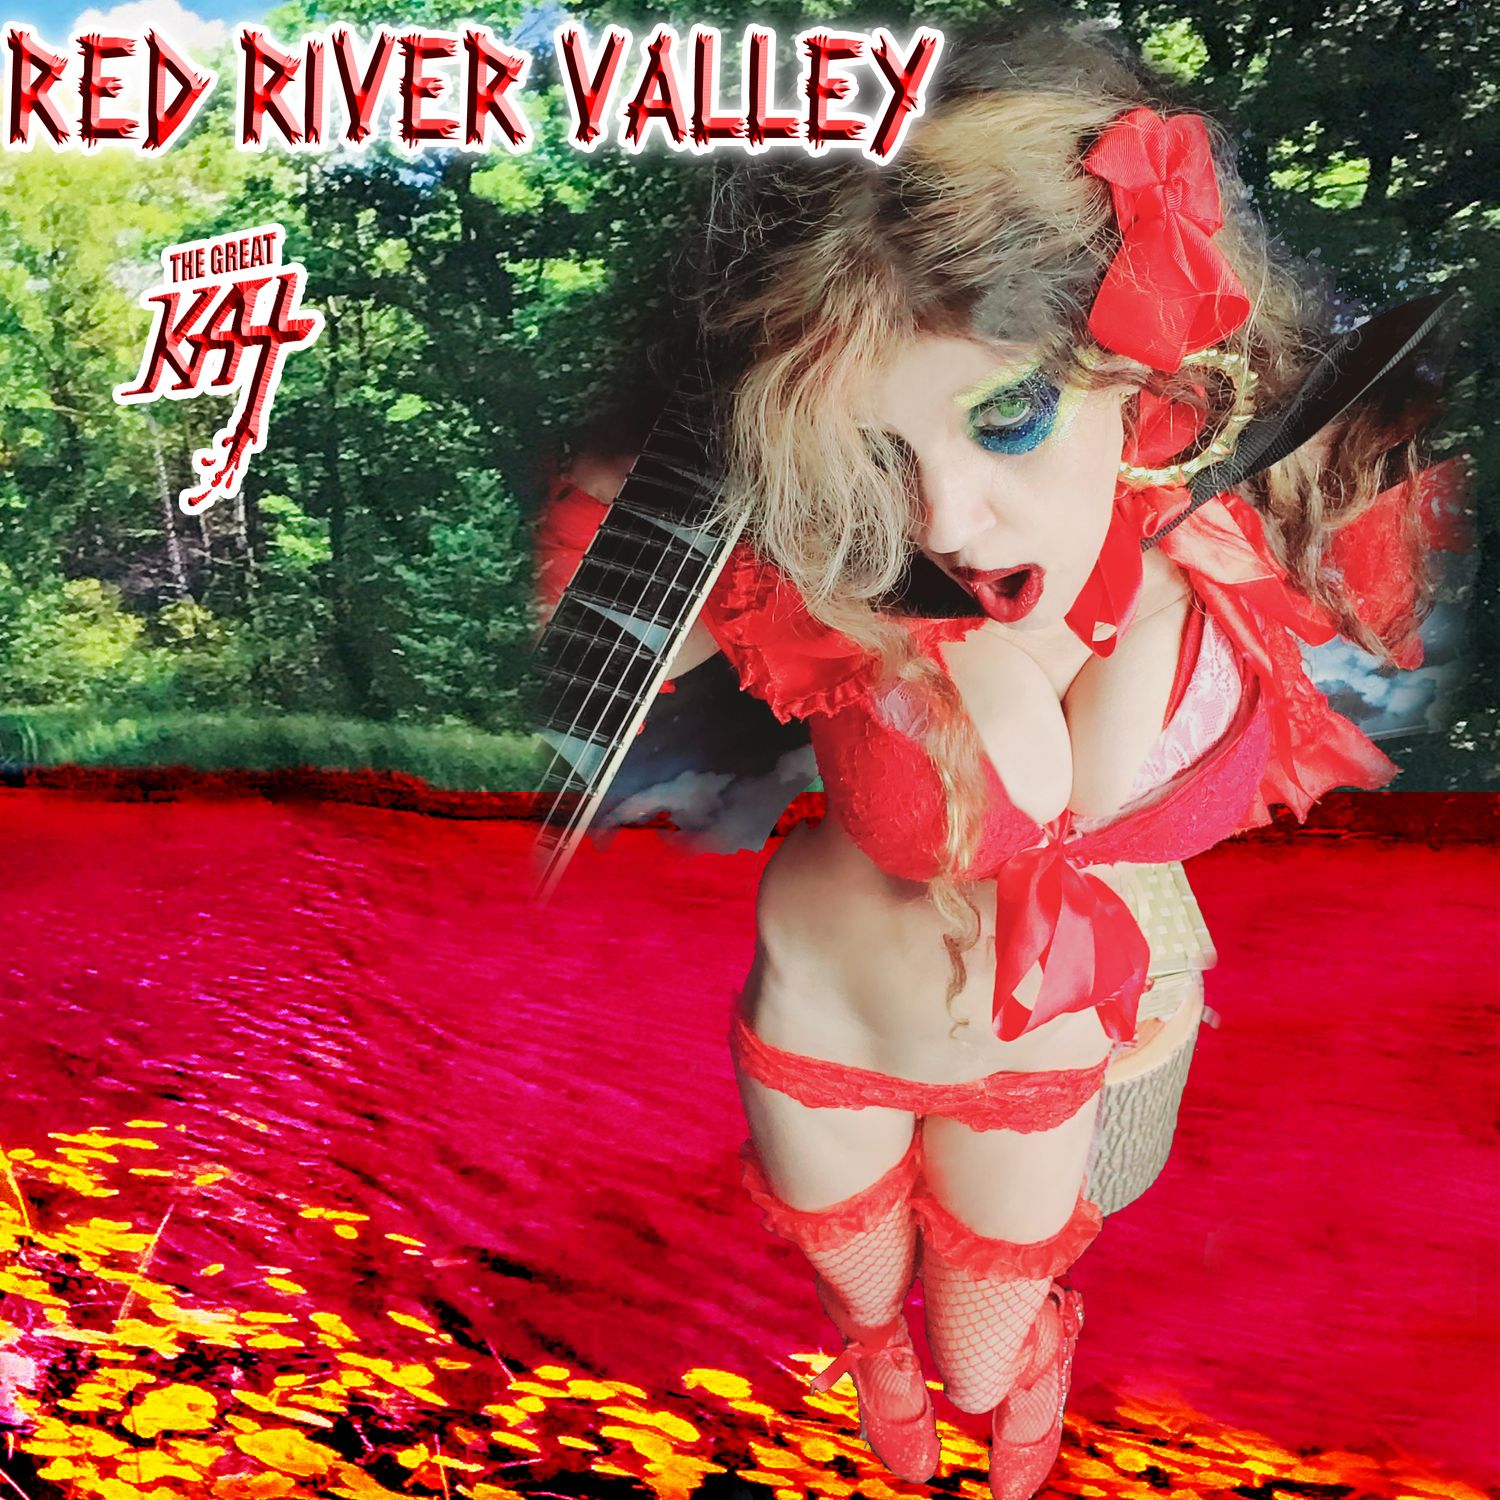 "RED RIVER VALLEY"! HOT KAT 8x10 Glossy Color Photo! Personalized Autographed by THE GREAT KAT!